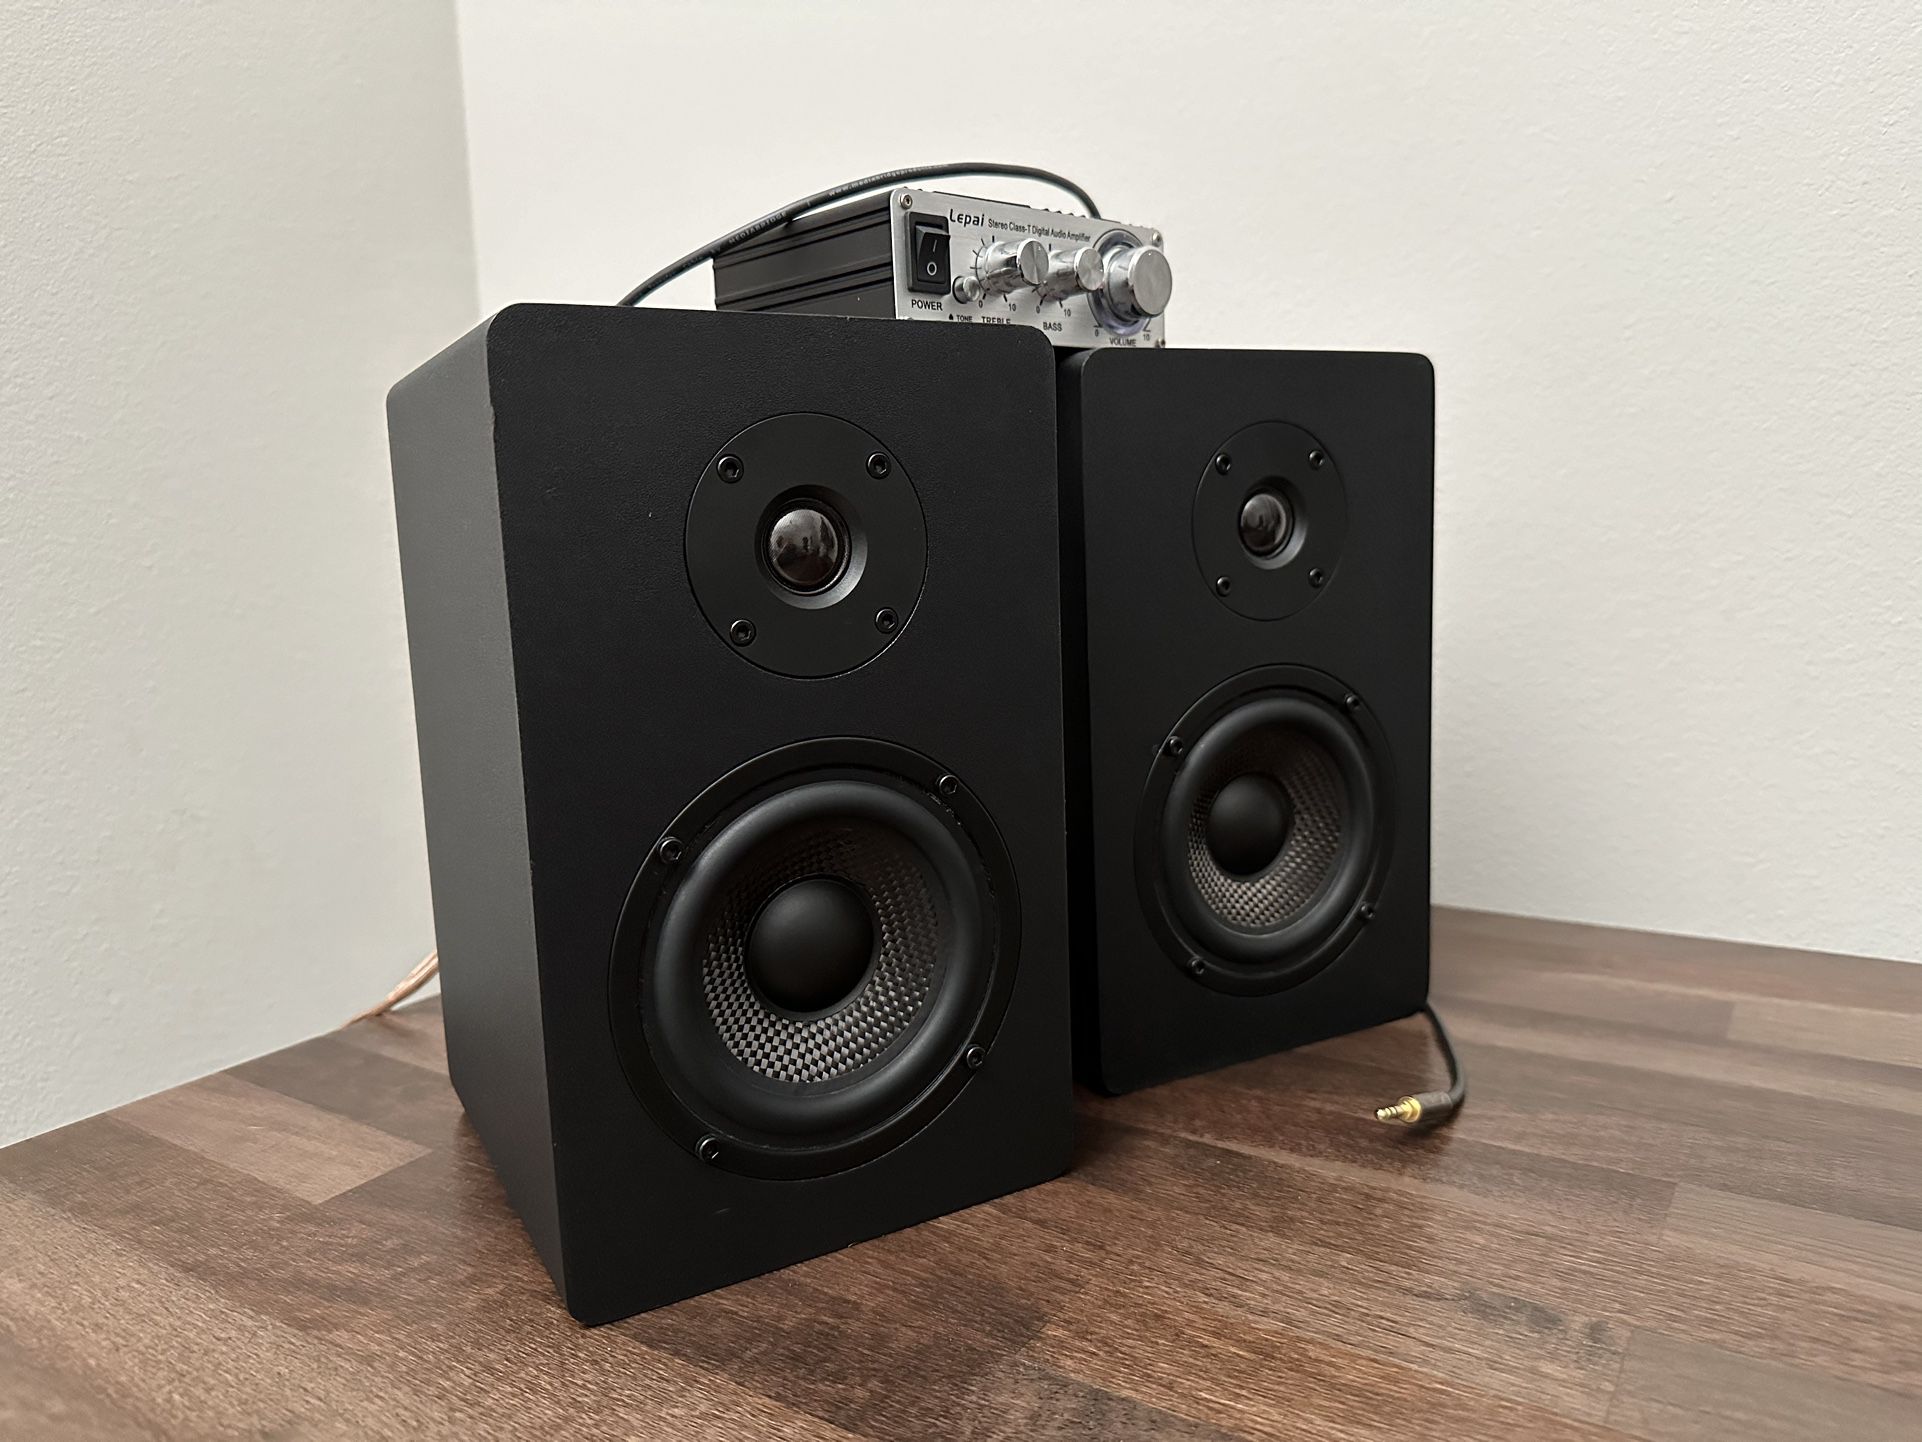 Micca MB42X Speakers with Lepai LP-2020A+ Amp - High-Quality Audio Combo!